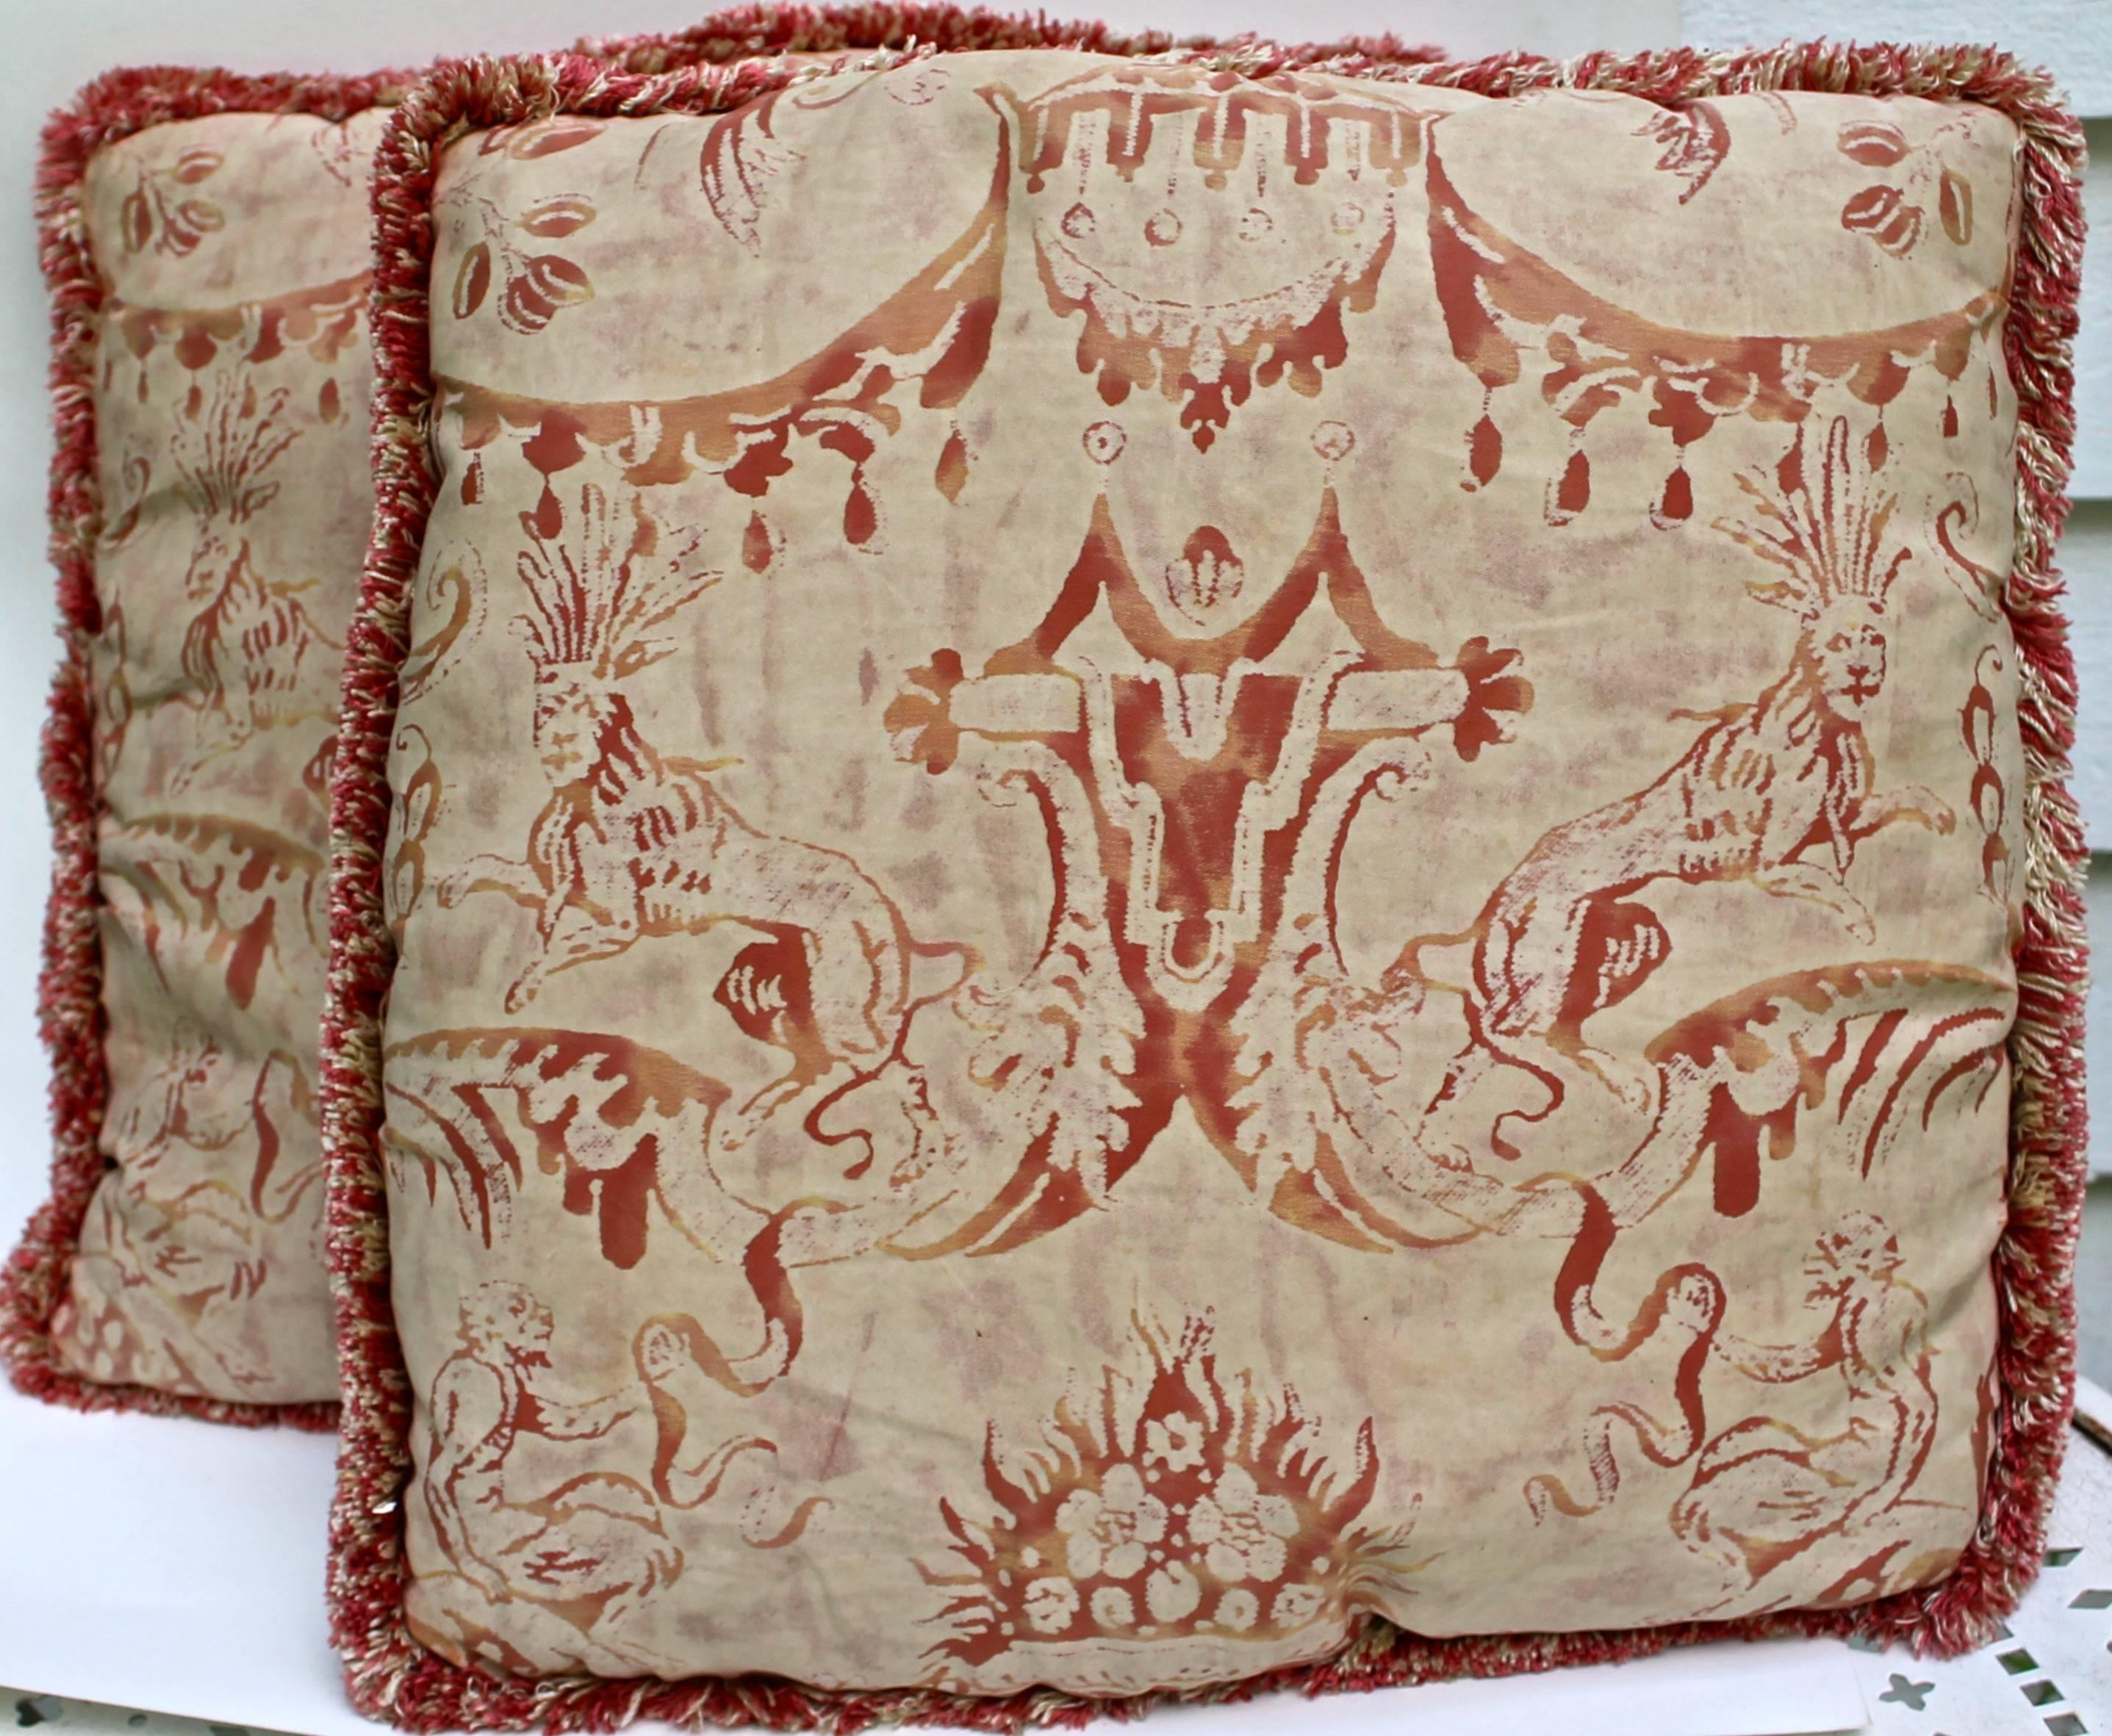 Neoclassical Revival Pair of Vintage Mariano Fortuny Pillows, 